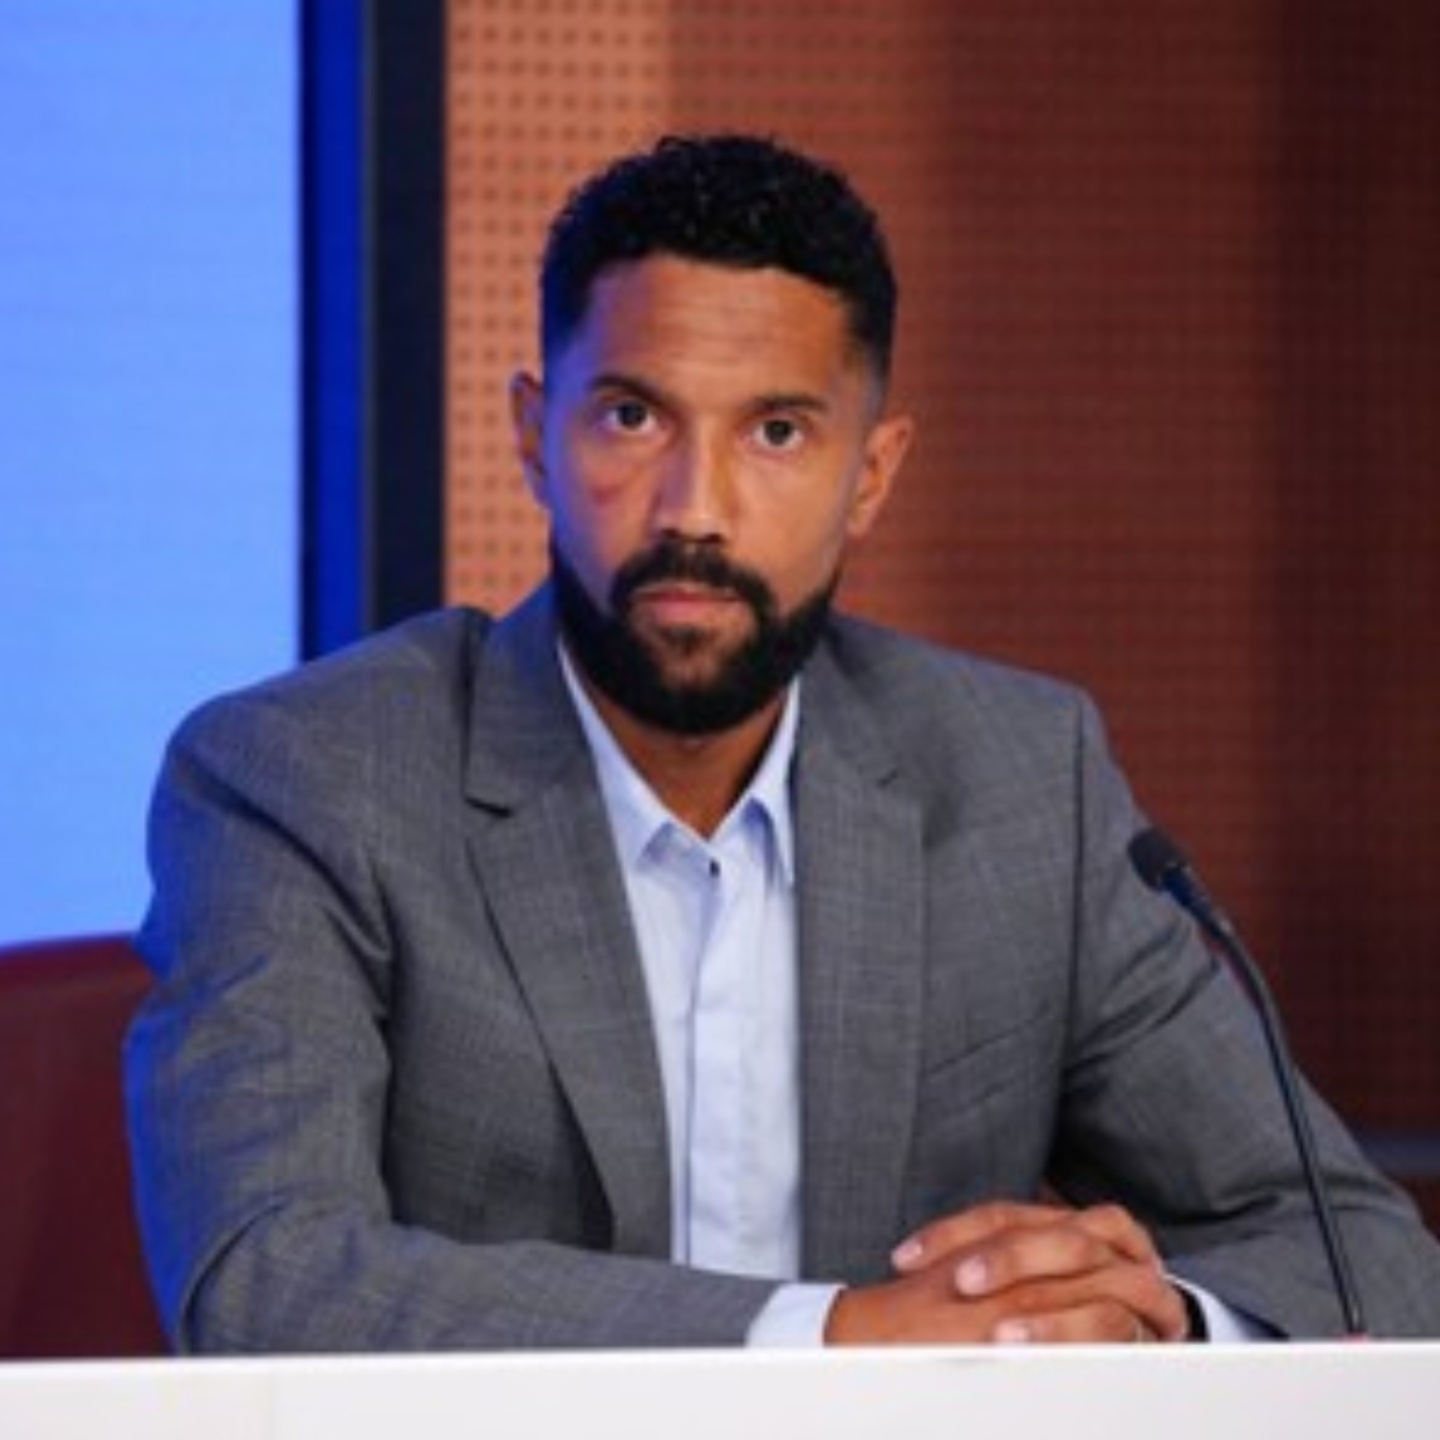 EPL: He has attributes – Clichy tips Chelsea star to become best player next season